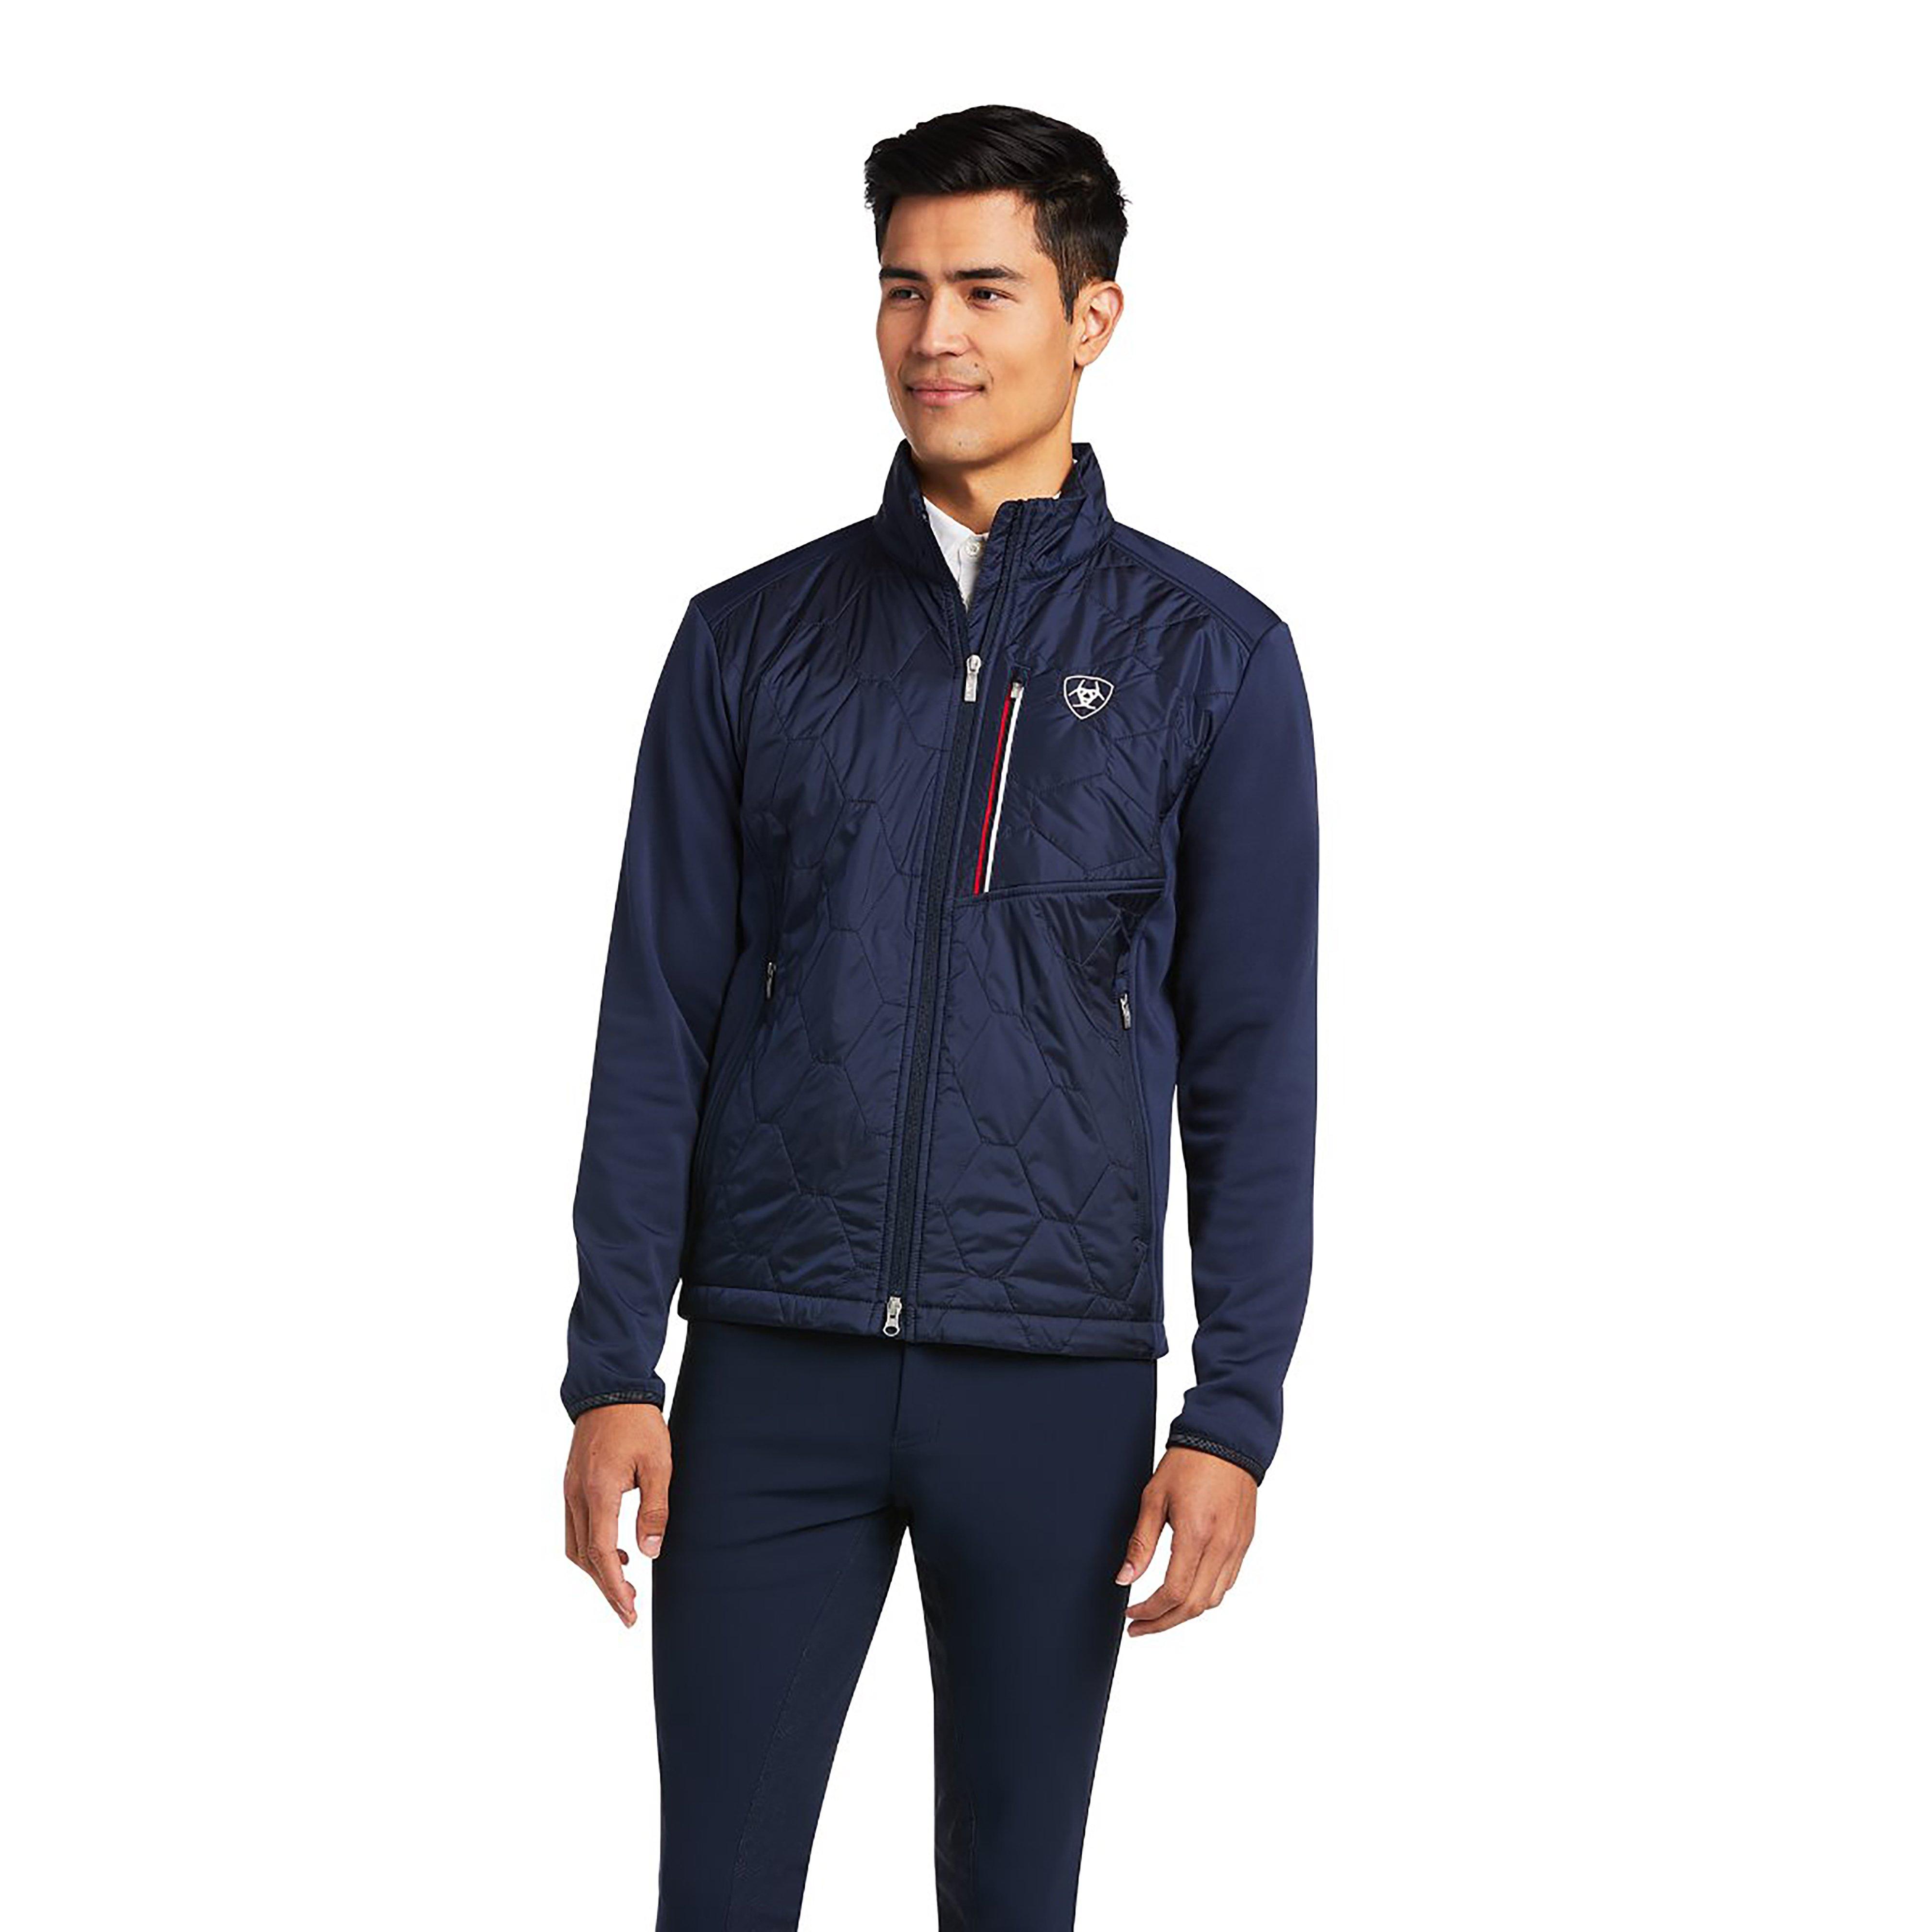 Mens Fusion Insulated Team Jacket Team